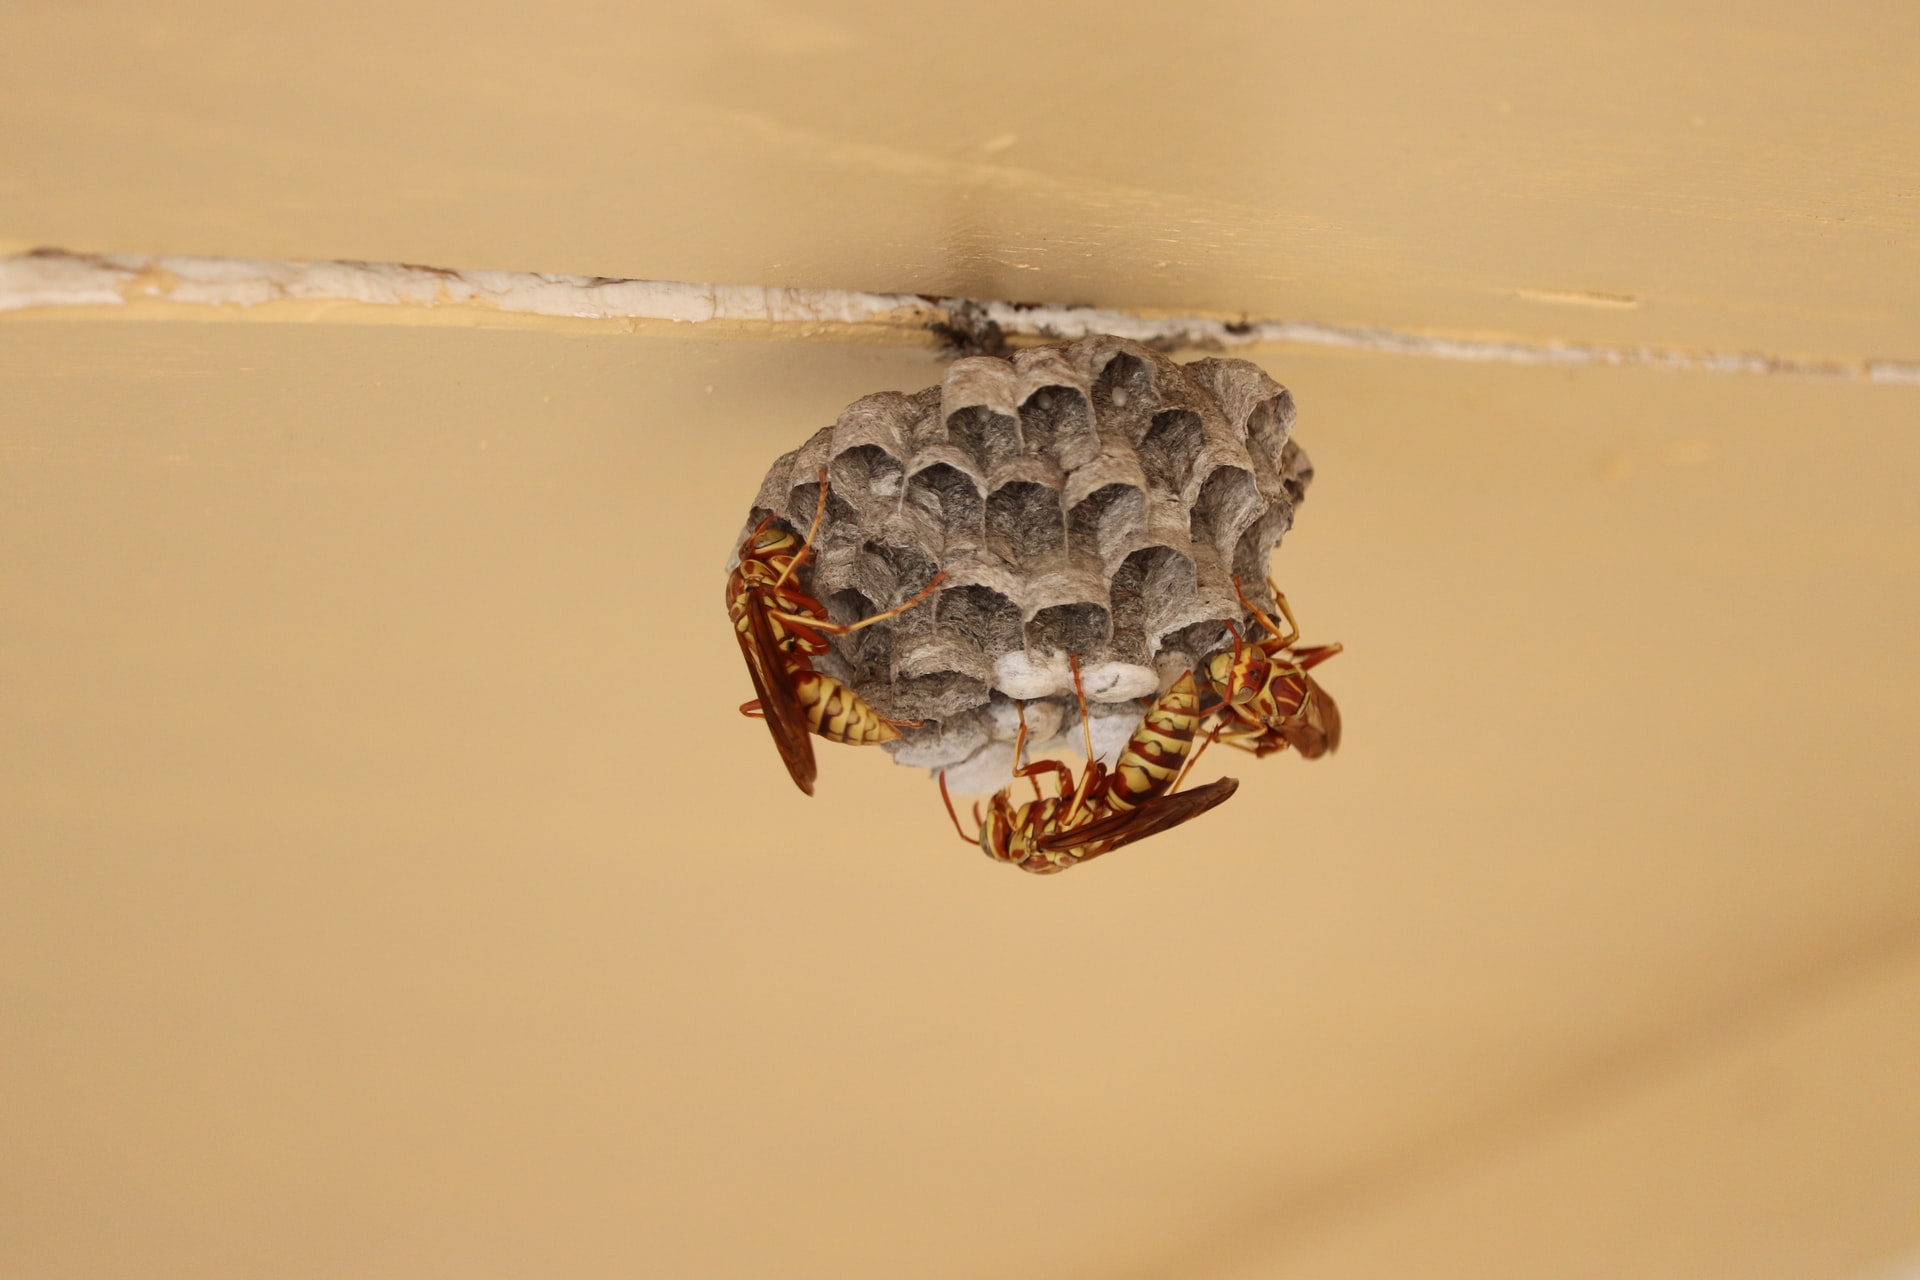 Another paper wasp nest